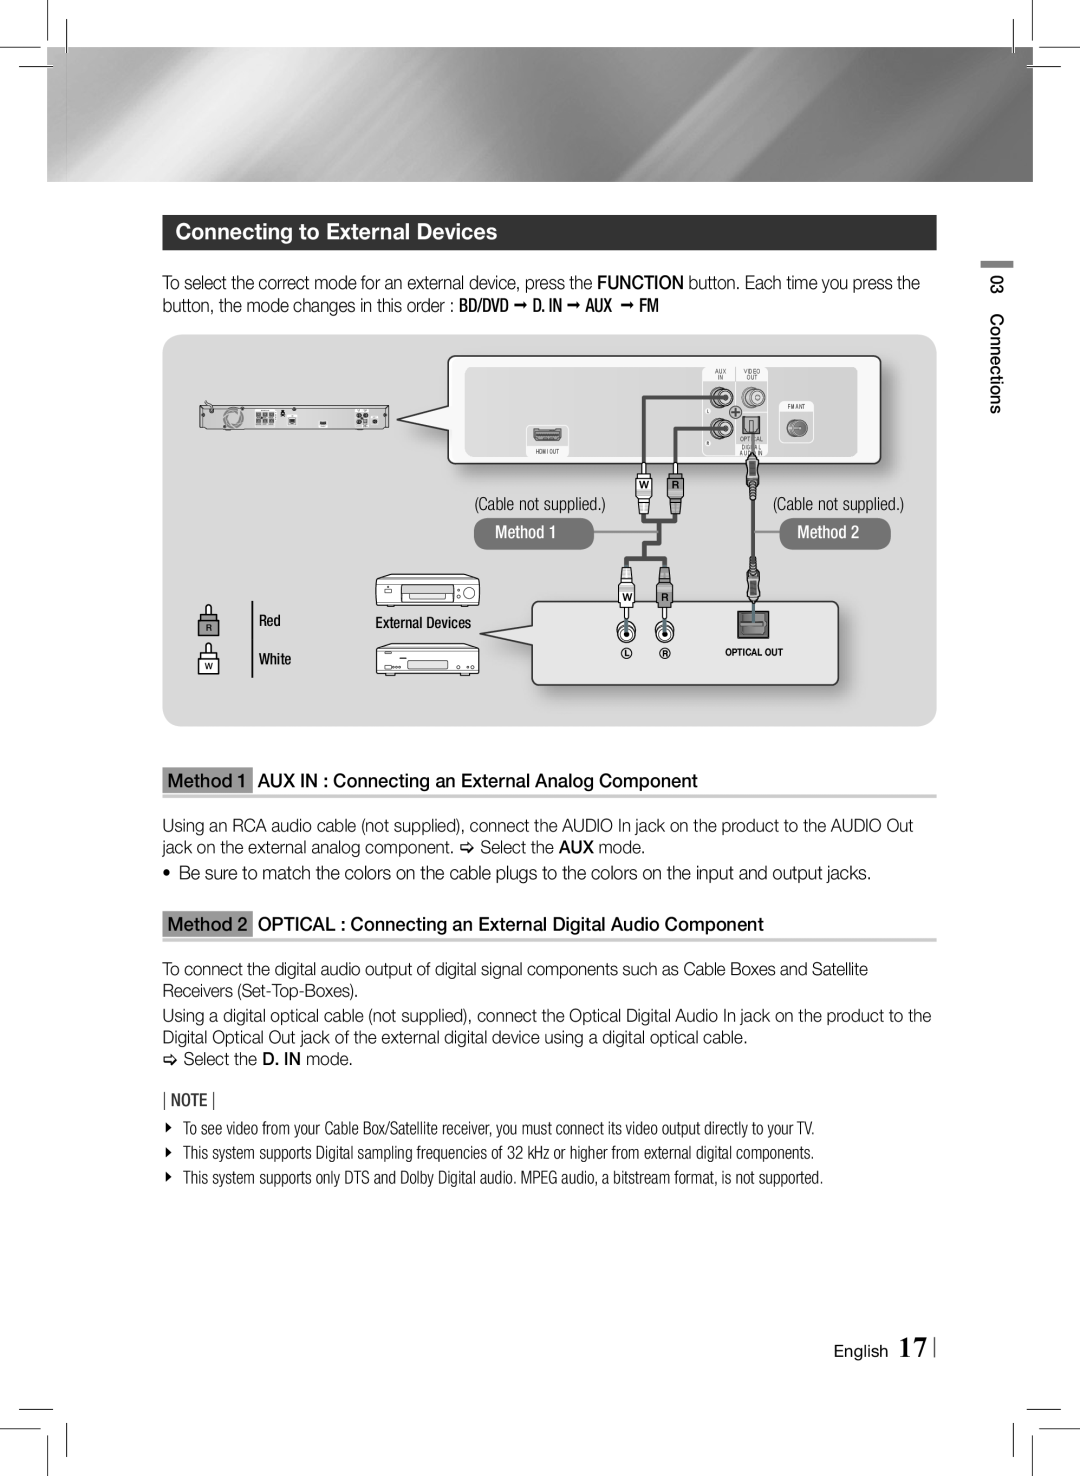 Samsung HTE3500ZA user manual Connecting to External Devices, Method 